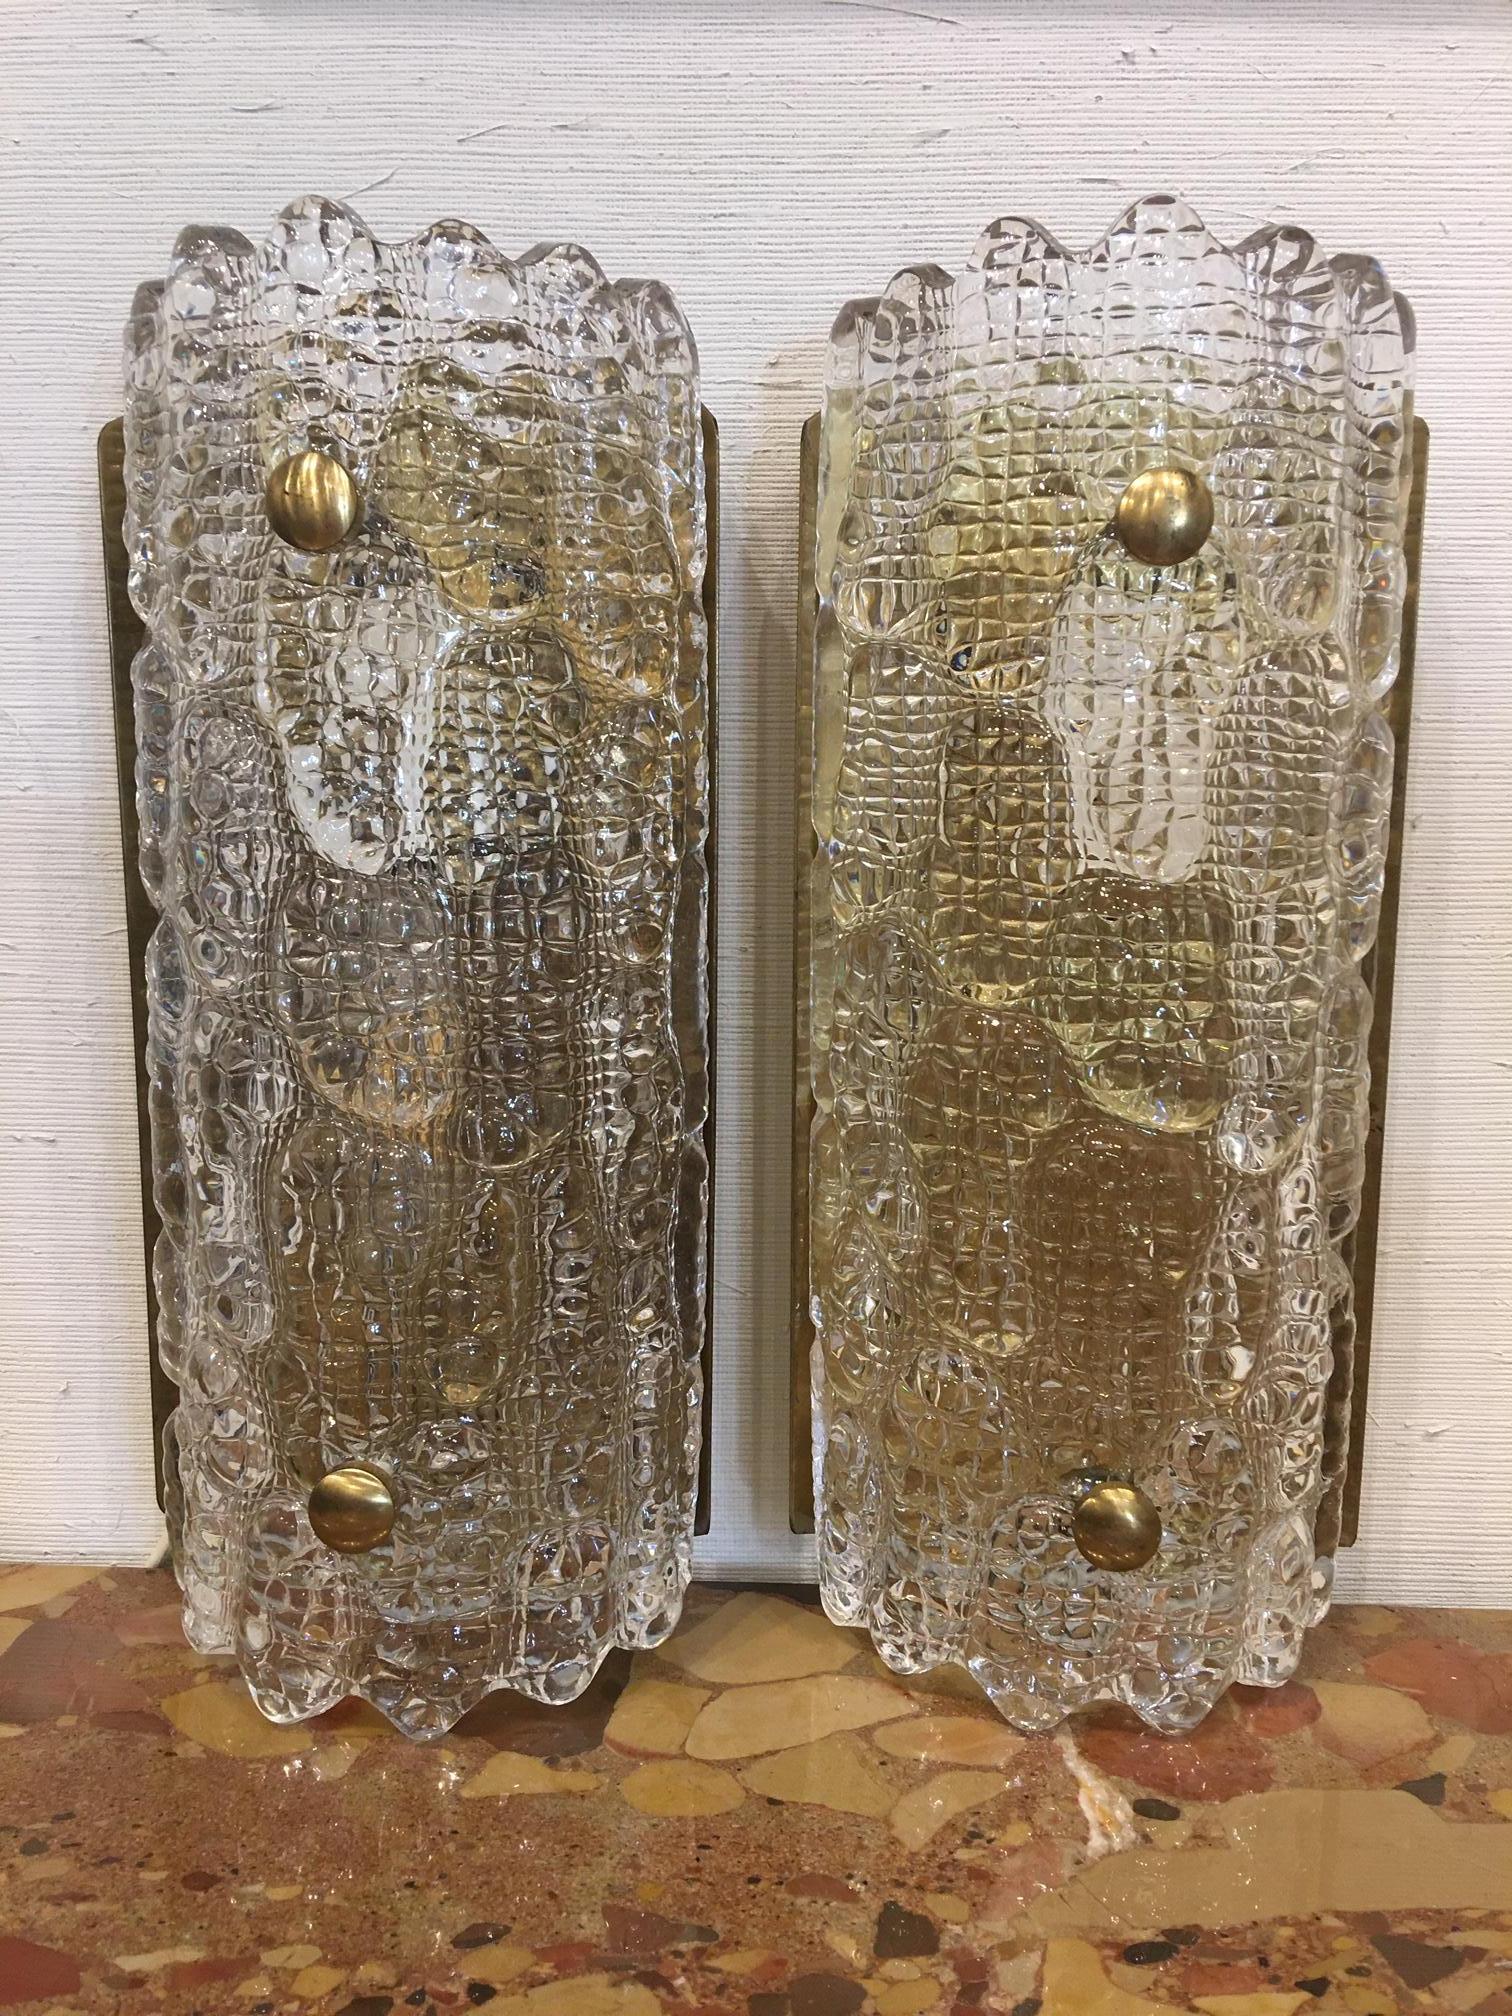 Pair of Art Deco Murano glass sconces on brass bases, 20th century.